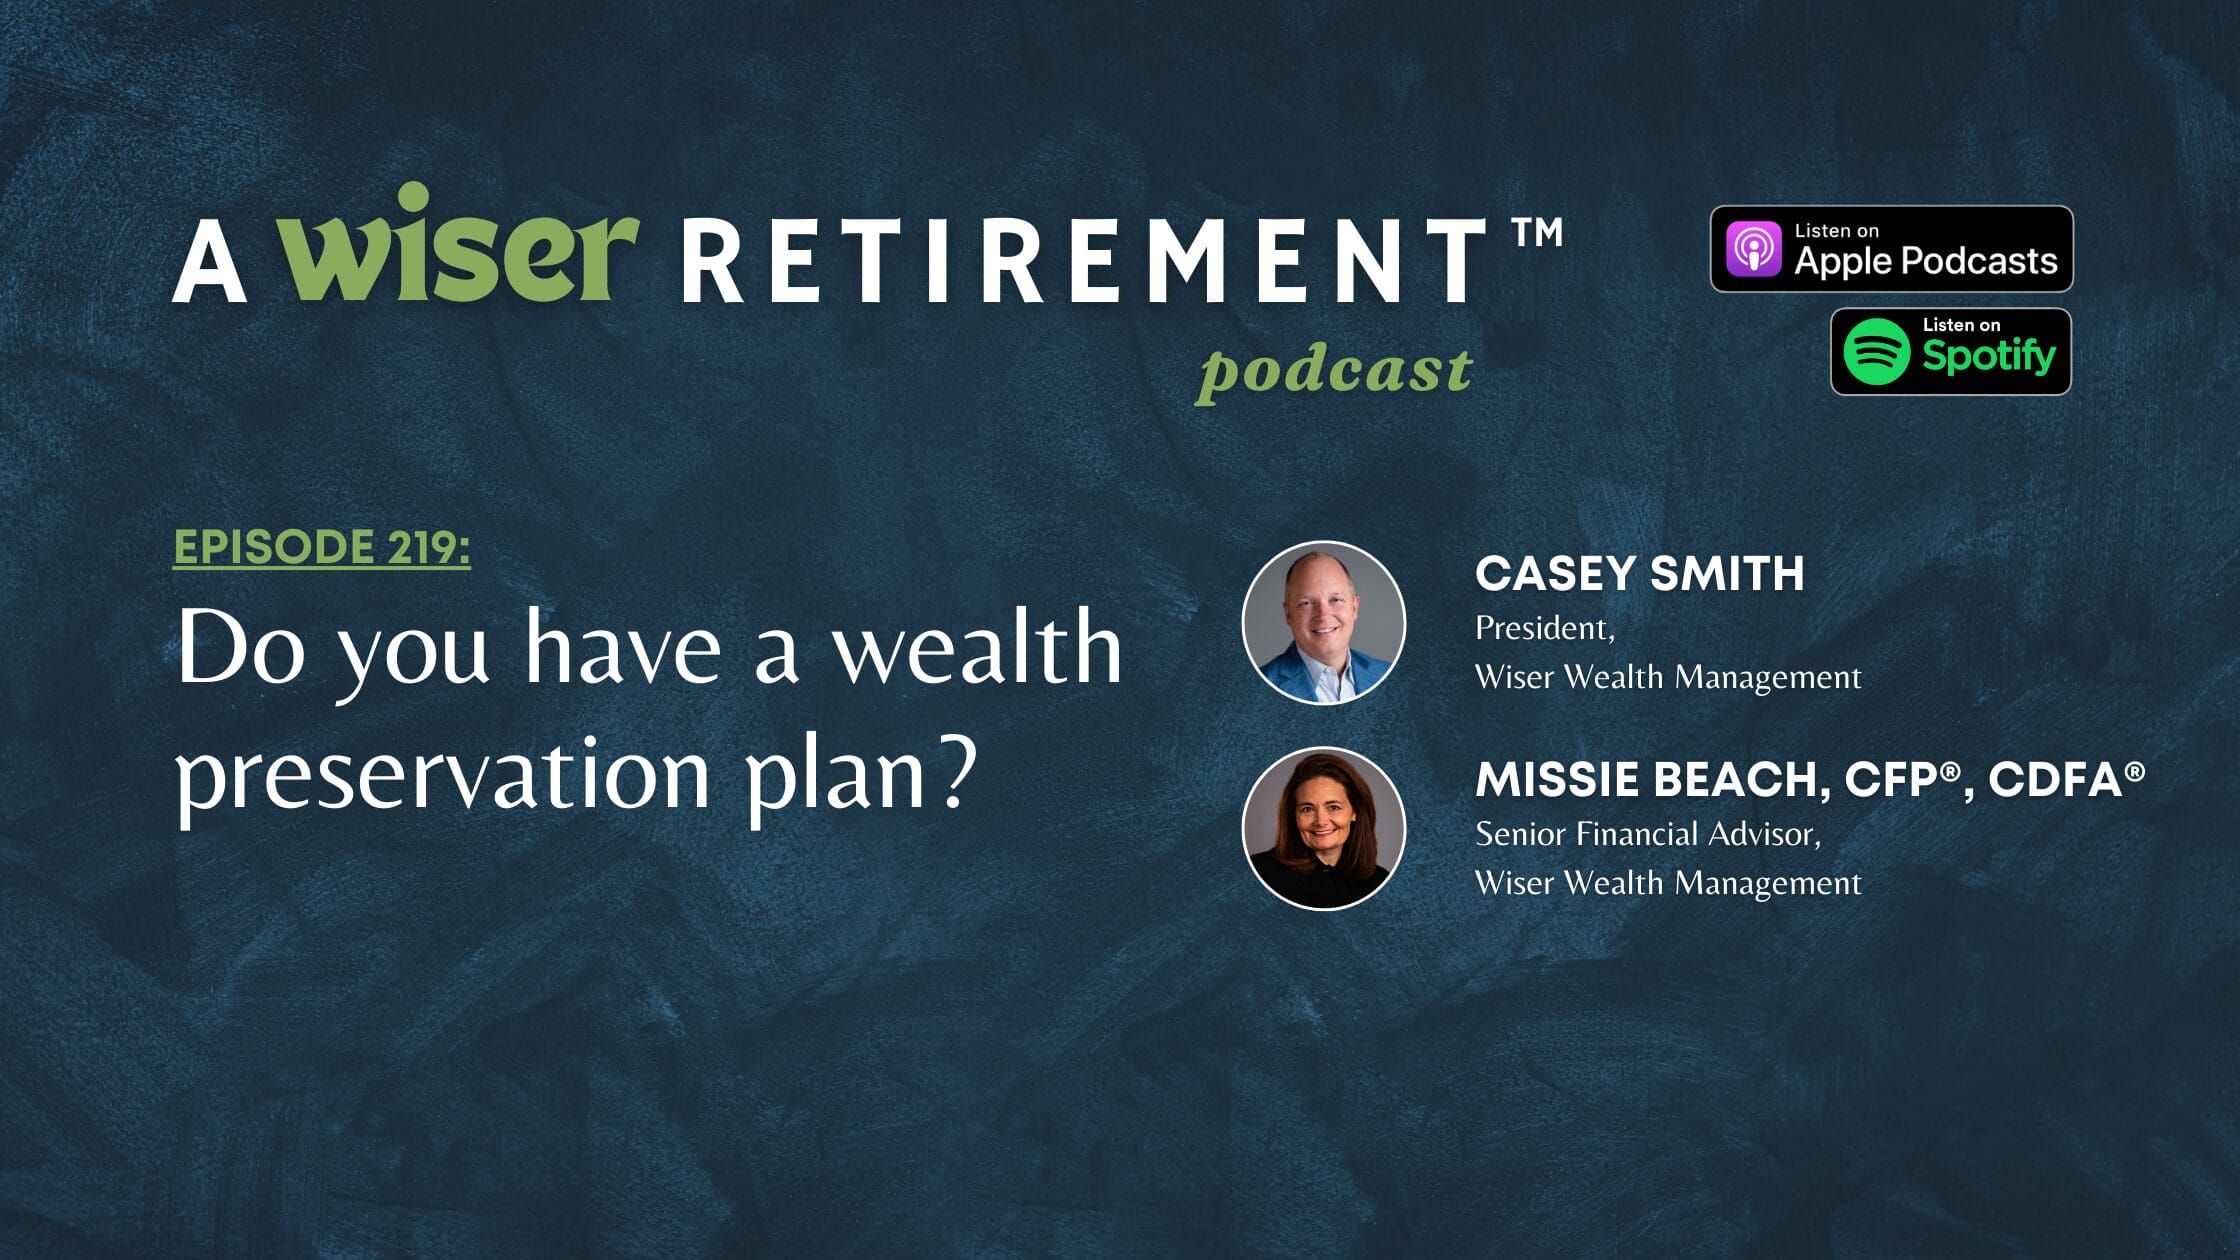 Do you have a wealth preservation plan?